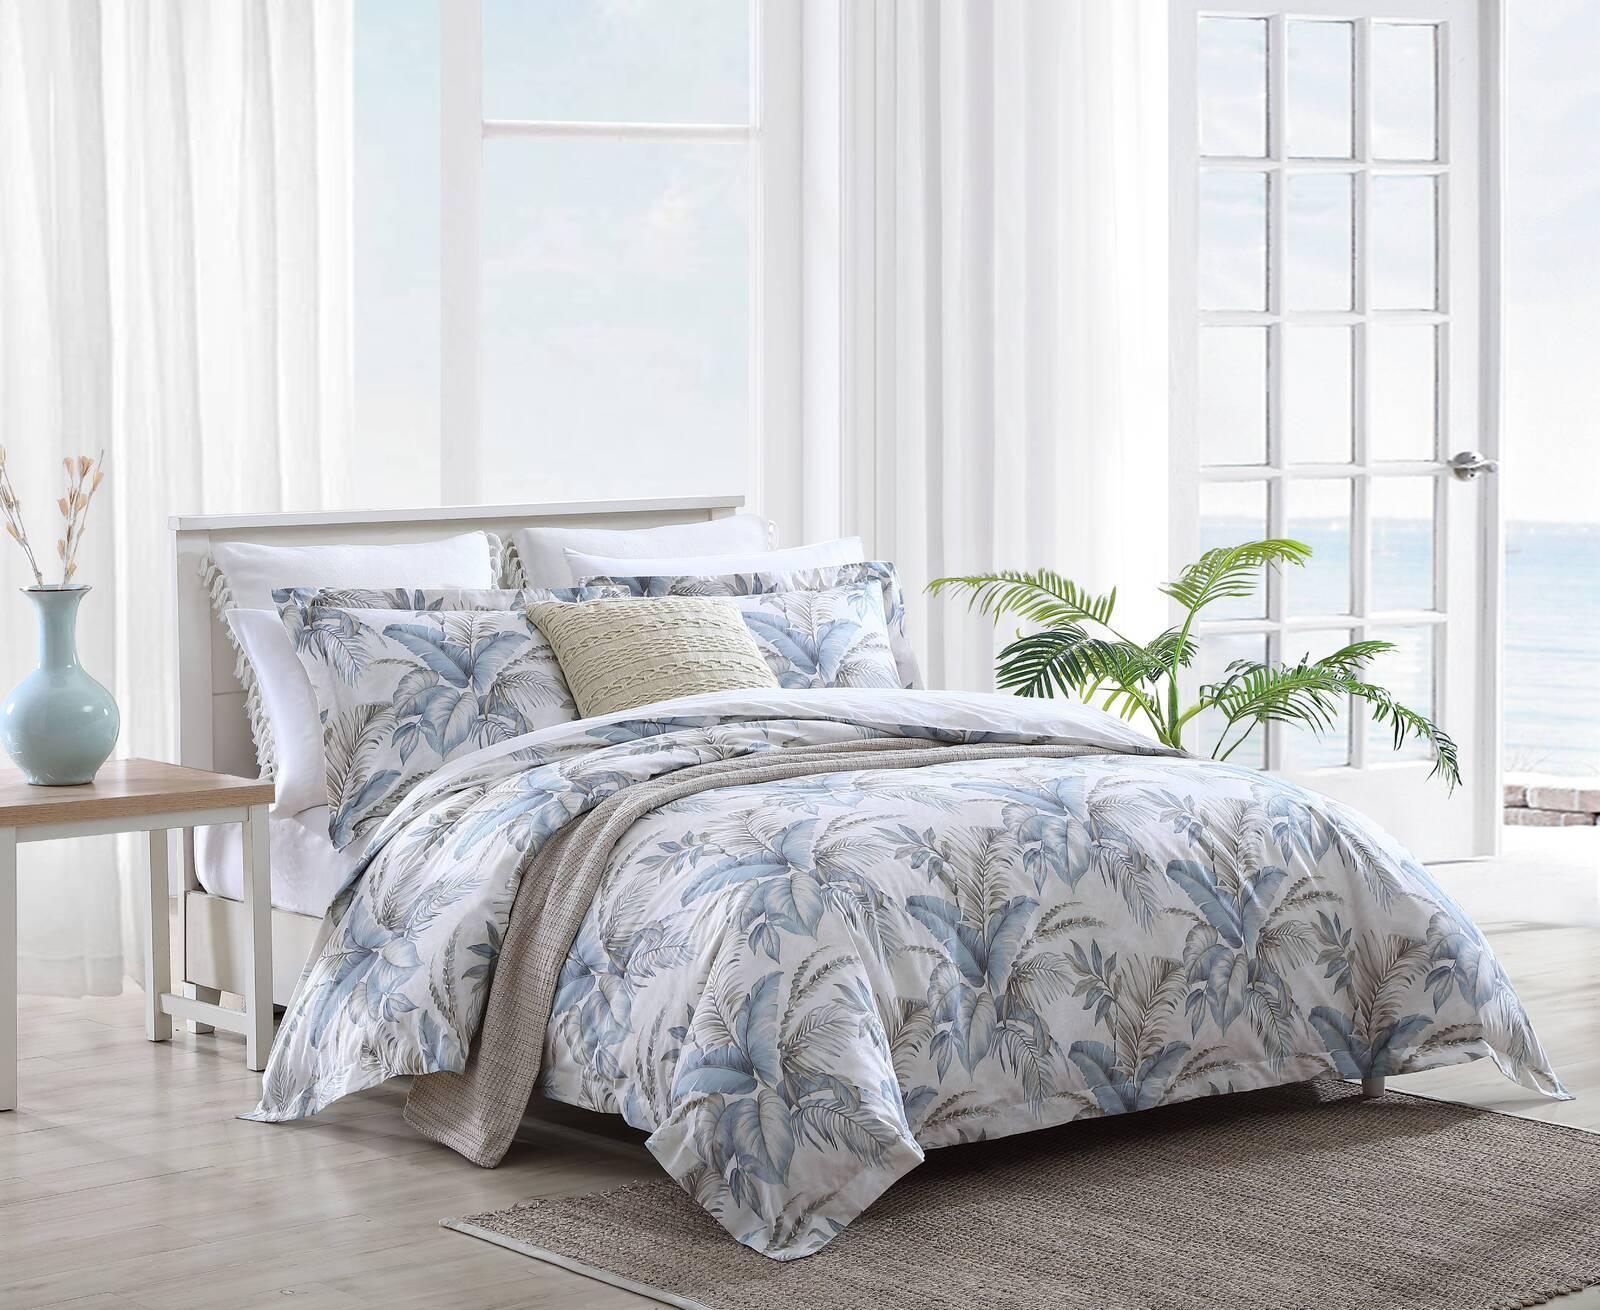 Tommy Bahama Queen Bed Bakers Bluff Quilt Cover Set w/ 2x Pillowcase Blue/Silver